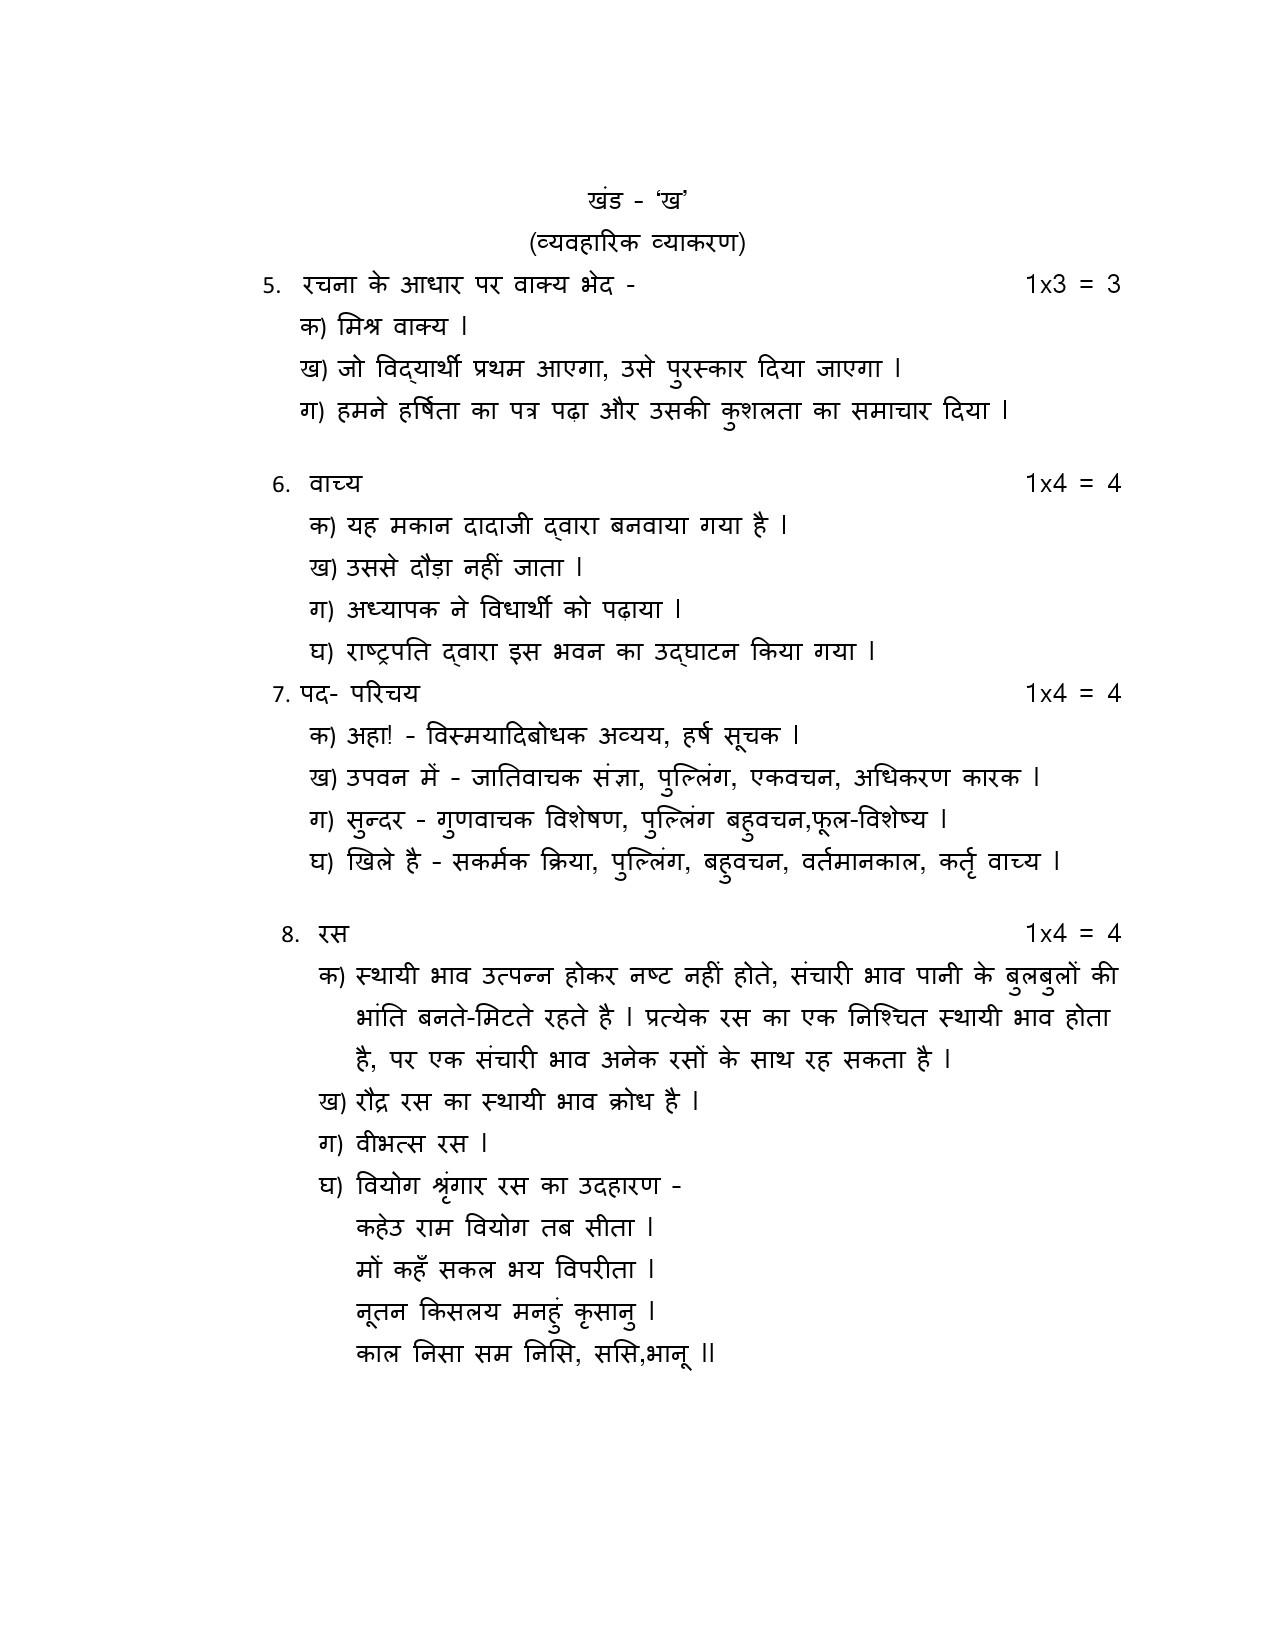 Hindi A CBSE Class X Sample Question Paper 2015 16 - Image 12